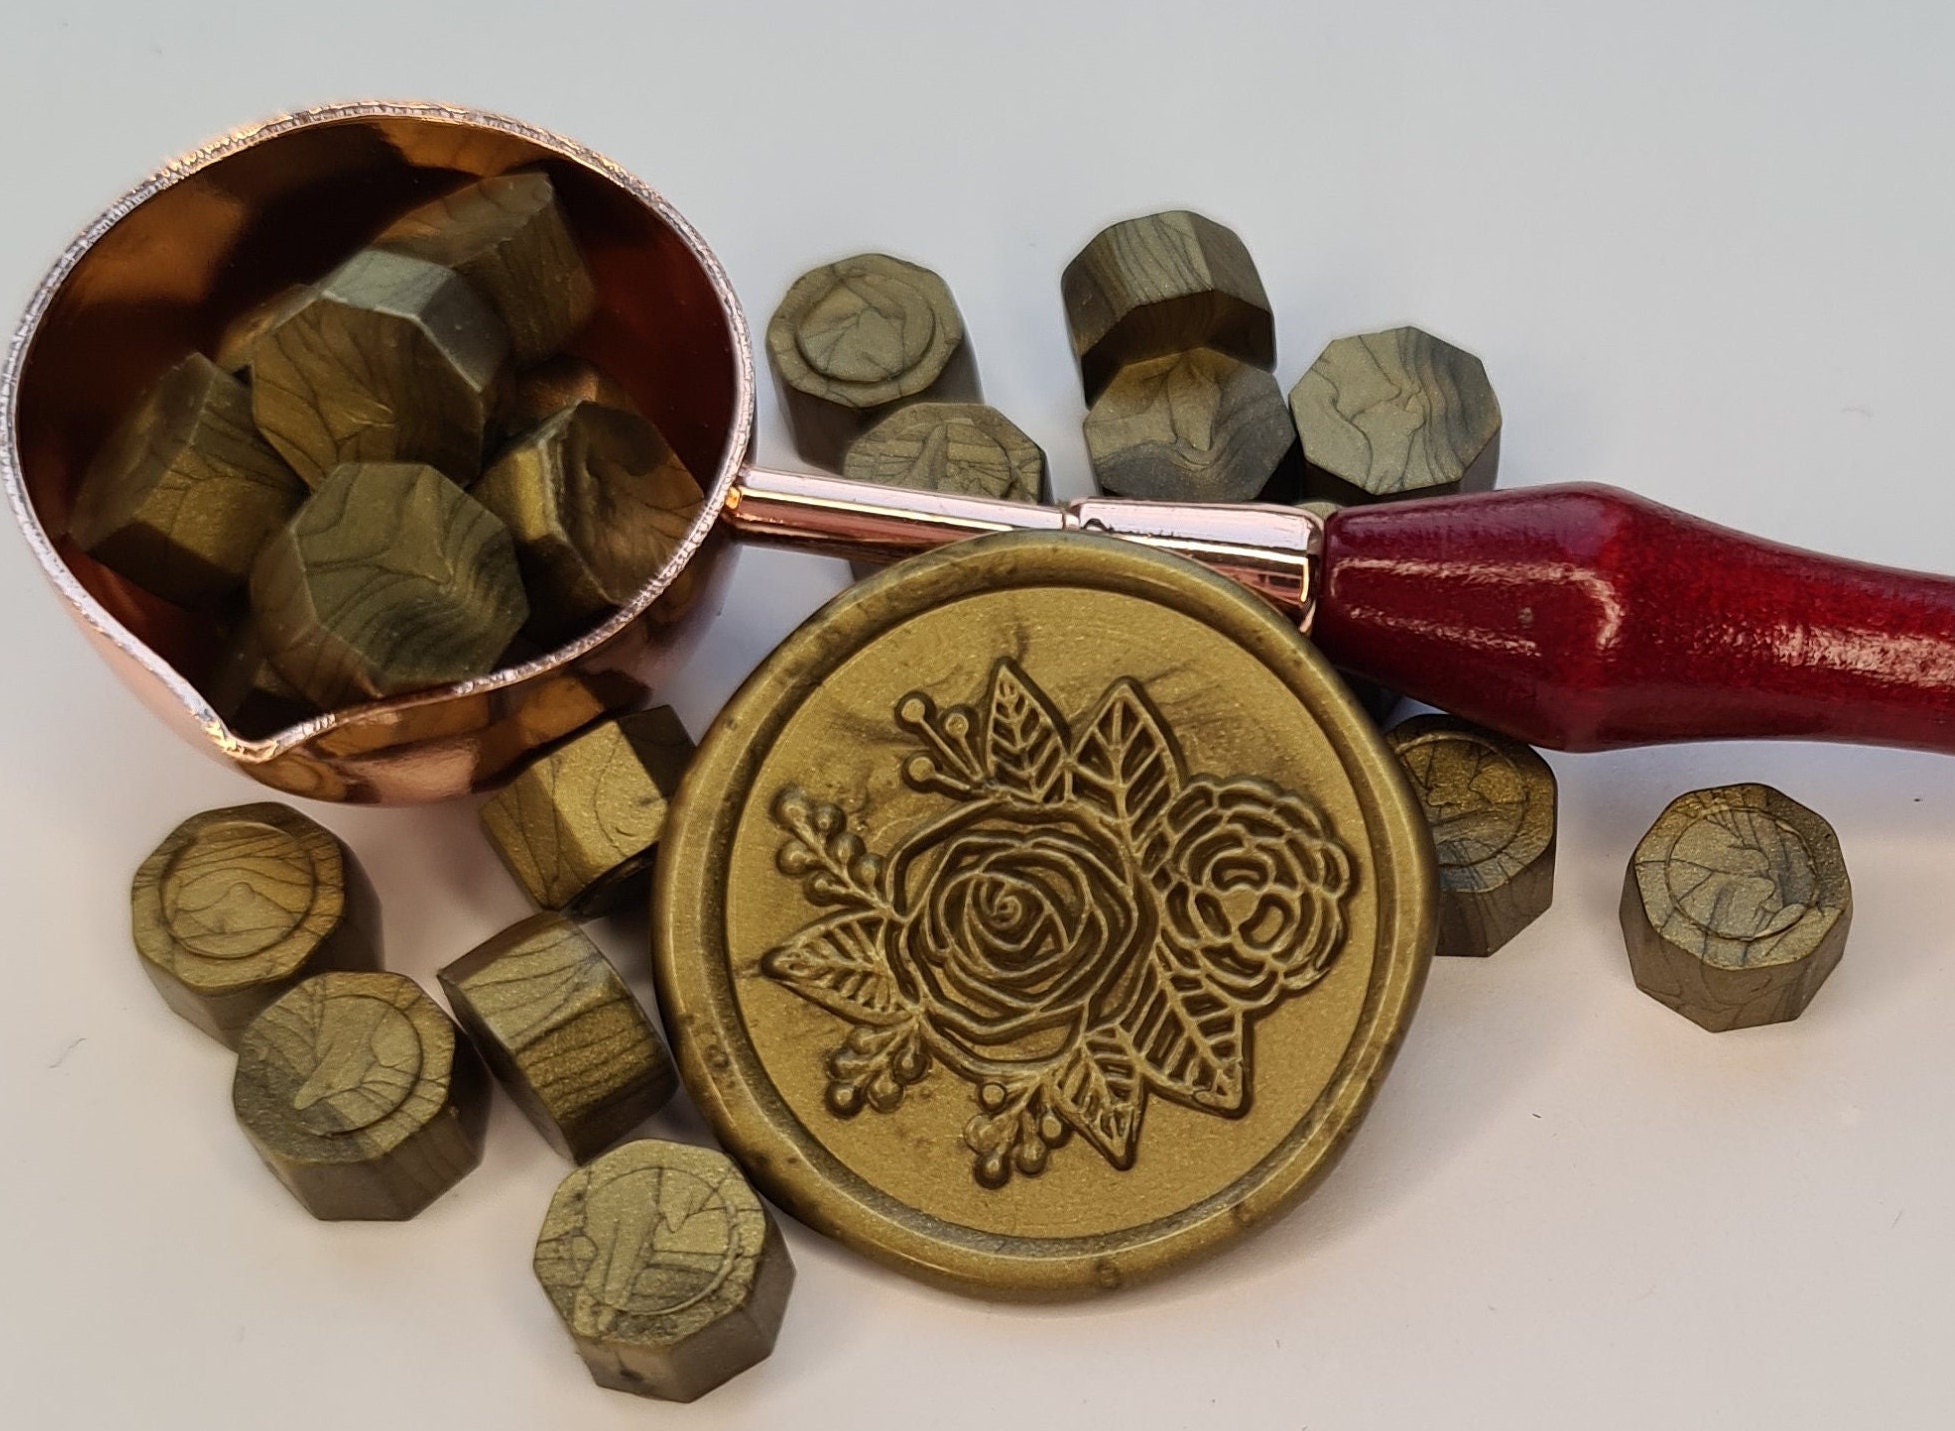 UNIQOOO Little Bee Wax Seal Stamp-Sealing Wax Stamp Great for Embellishment  of Envelopes, Wedding Invitations, Wine Packages, Snail Mails, Gift Idea